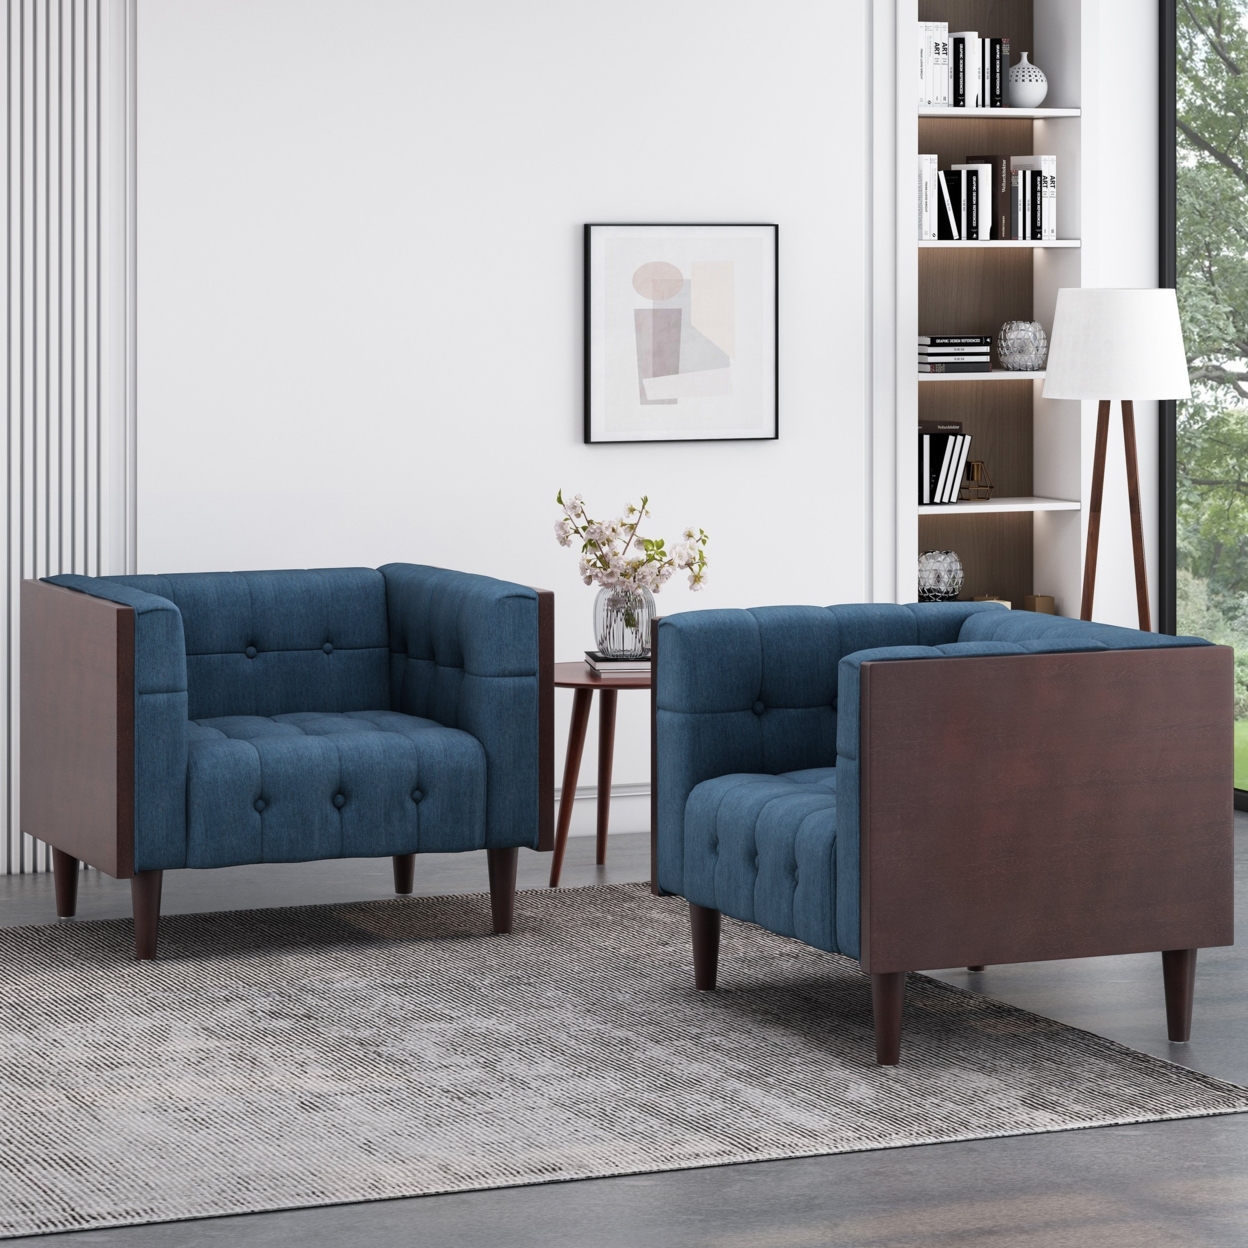 Croton Contemporary Tufted Club Chairs, Set Of 2 - Navy Blue